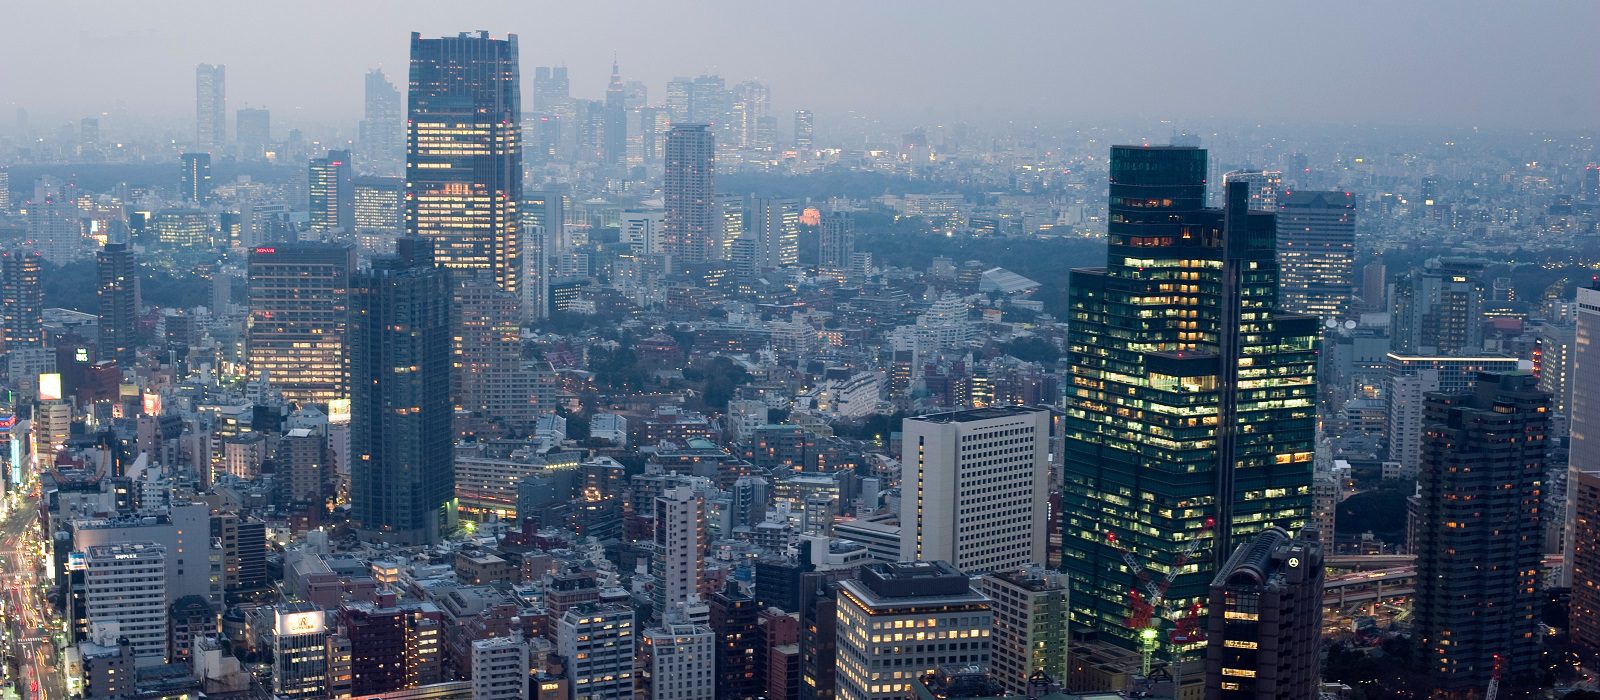 a grey looking urban scene, office buildings in tokyo with their lights on